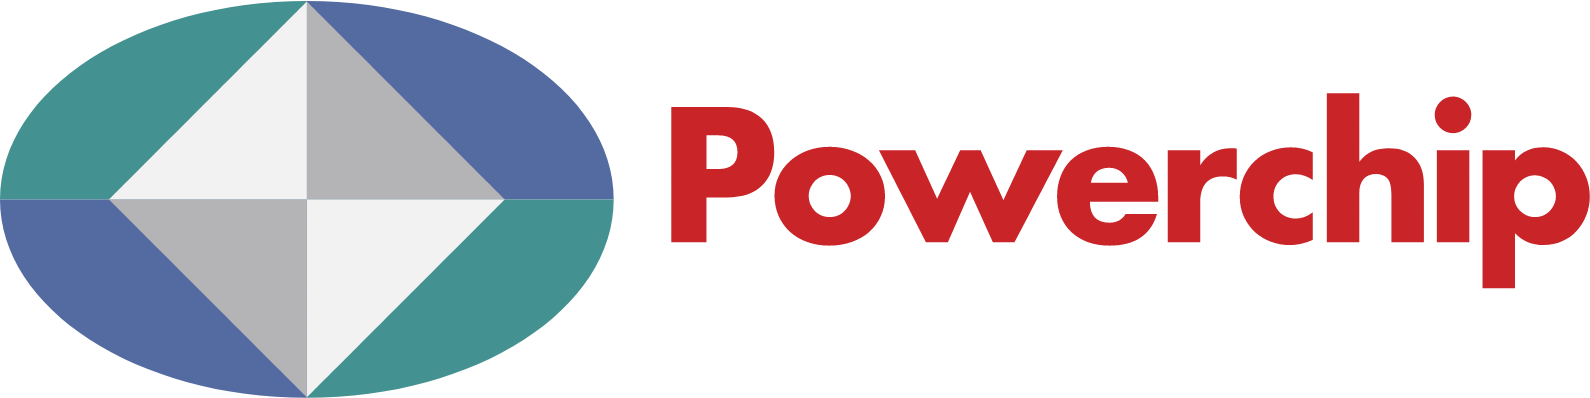 Powerchip Semiconductor Manufacturing logo large (transparent PNG)